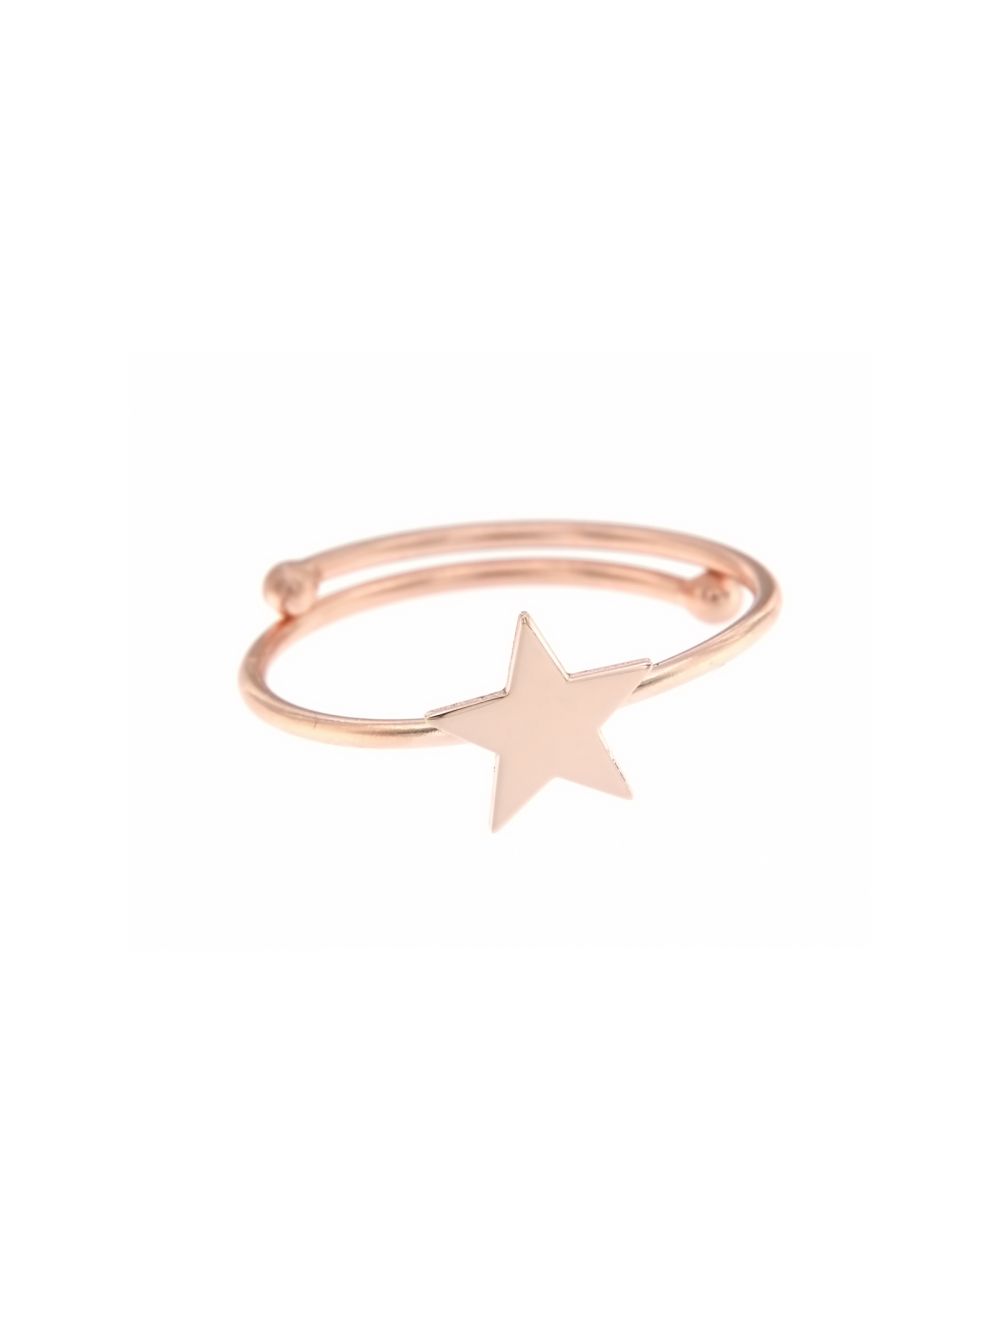 Maman et Sophie Stella Ring Silver 925% Pink